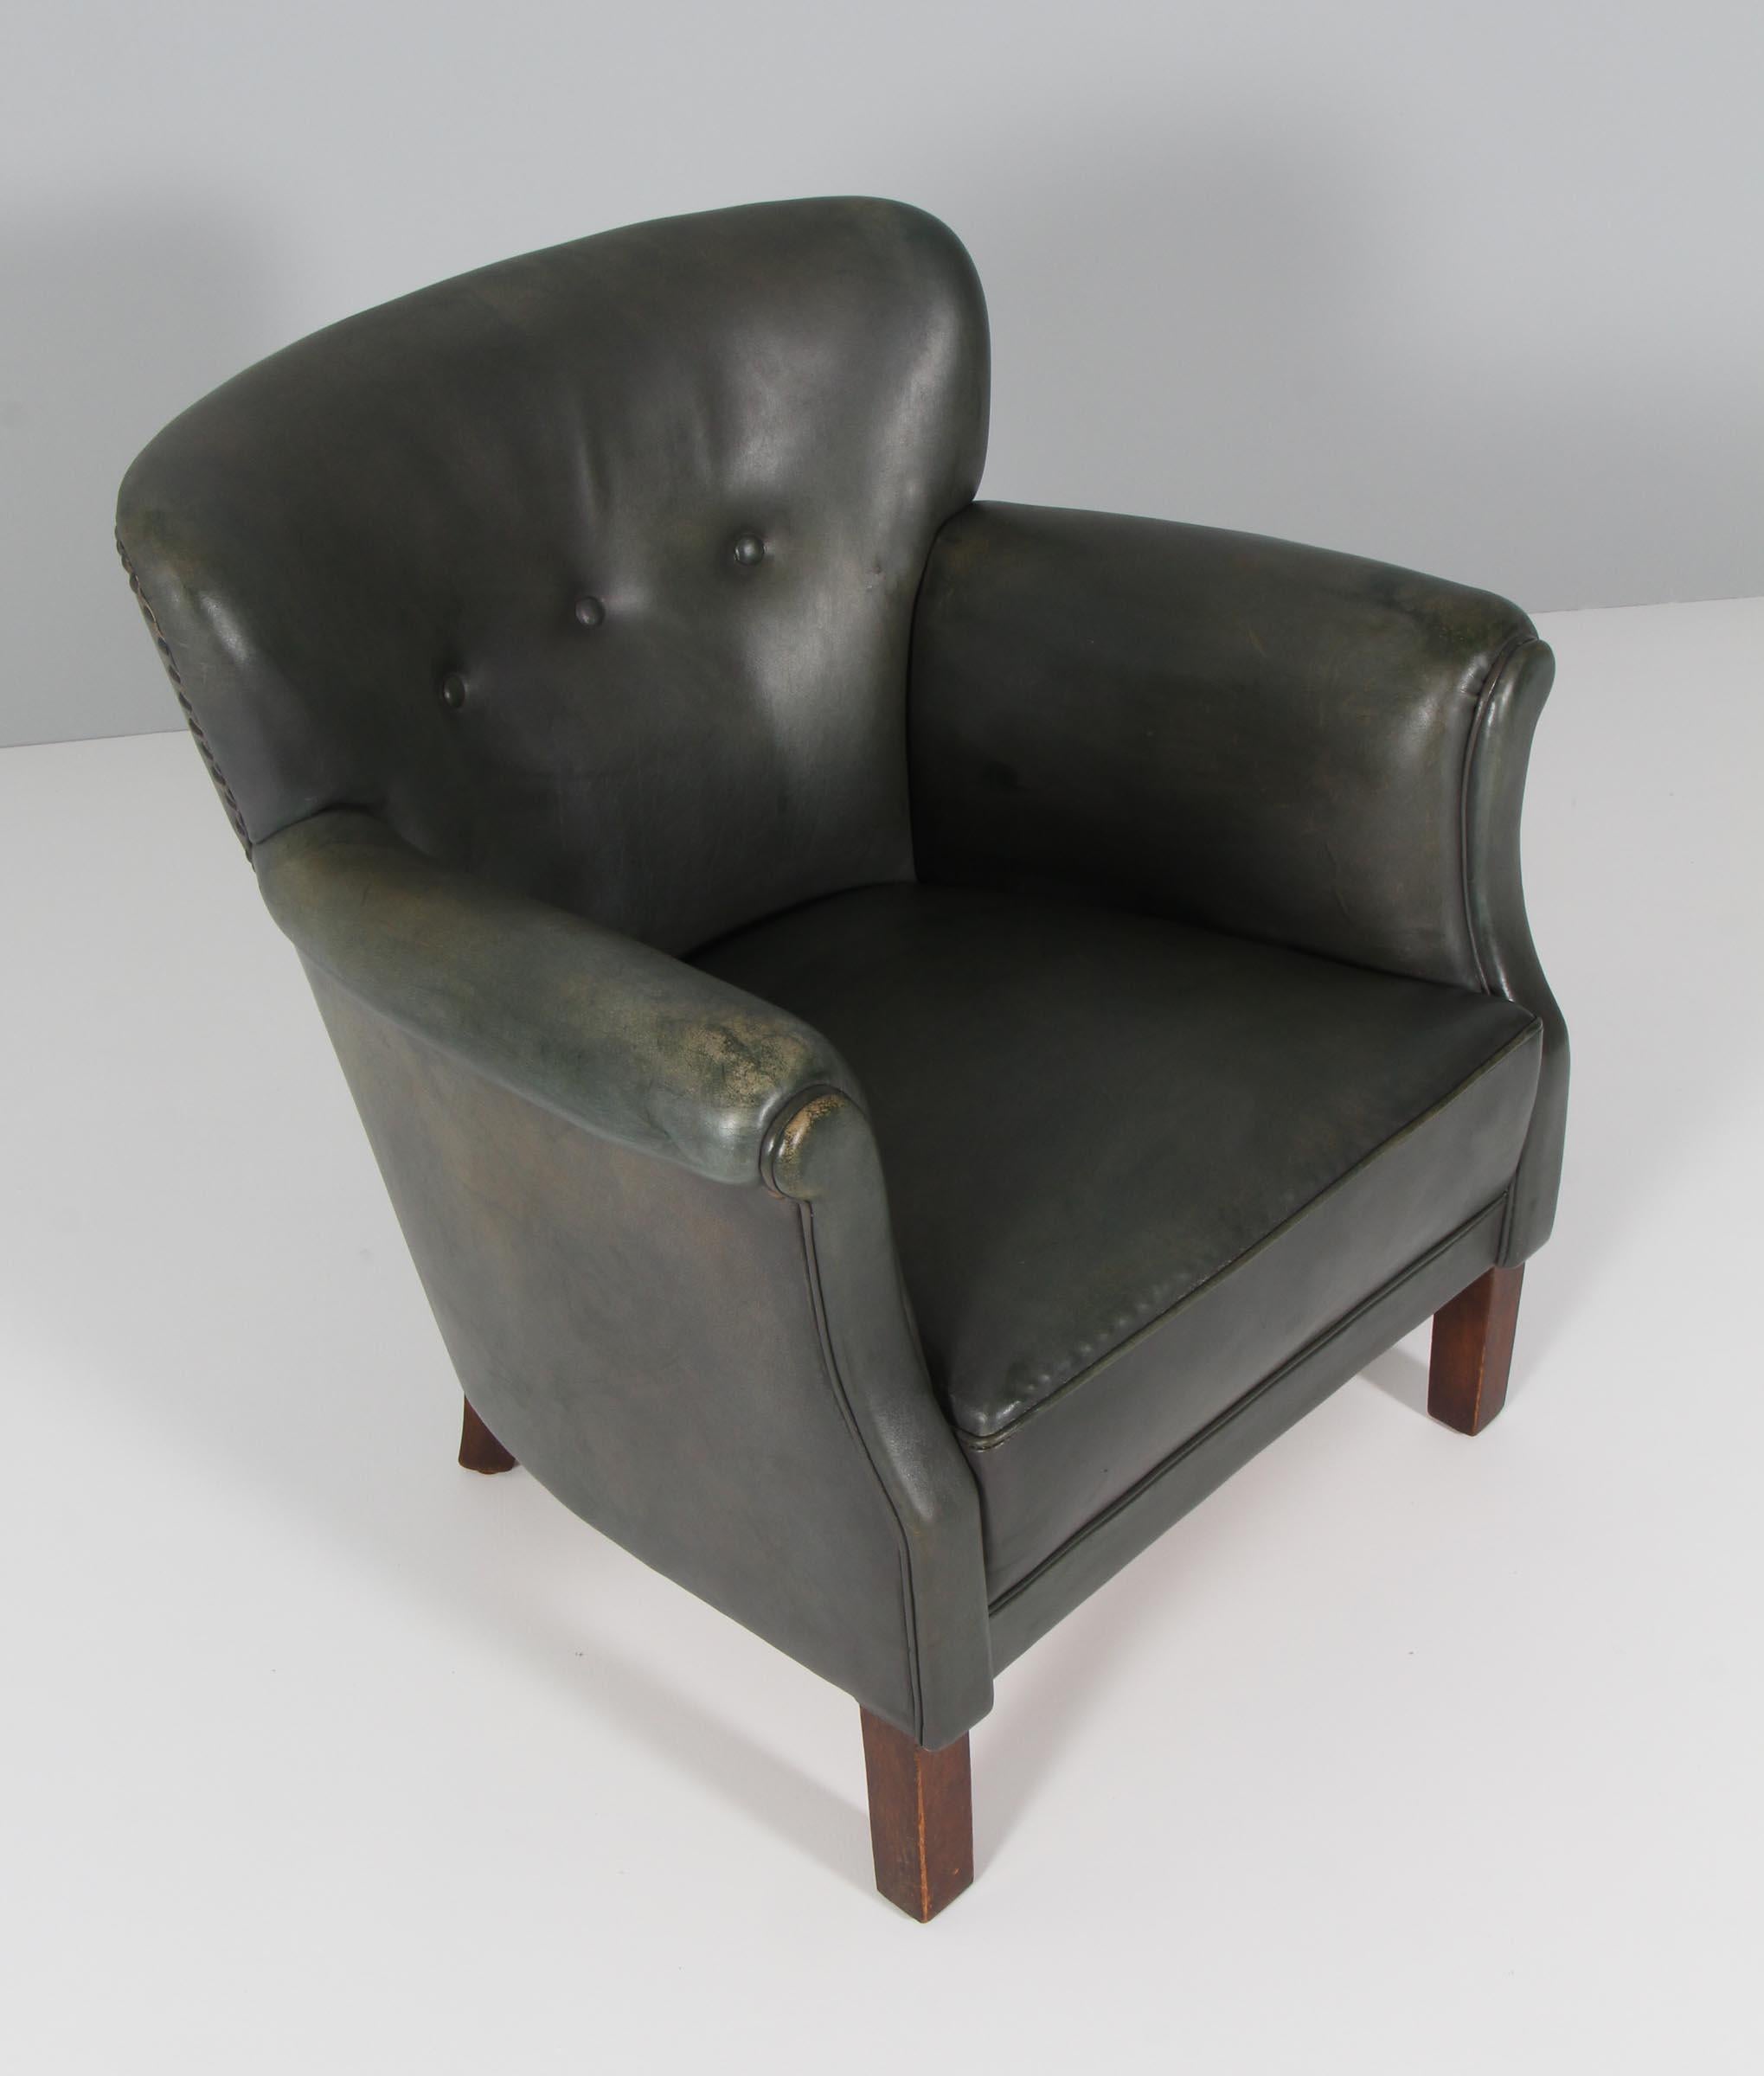 Danish cabinetmaker club chair in original green patinated leather.

Legs of stained beech.

Made in the 1940s.